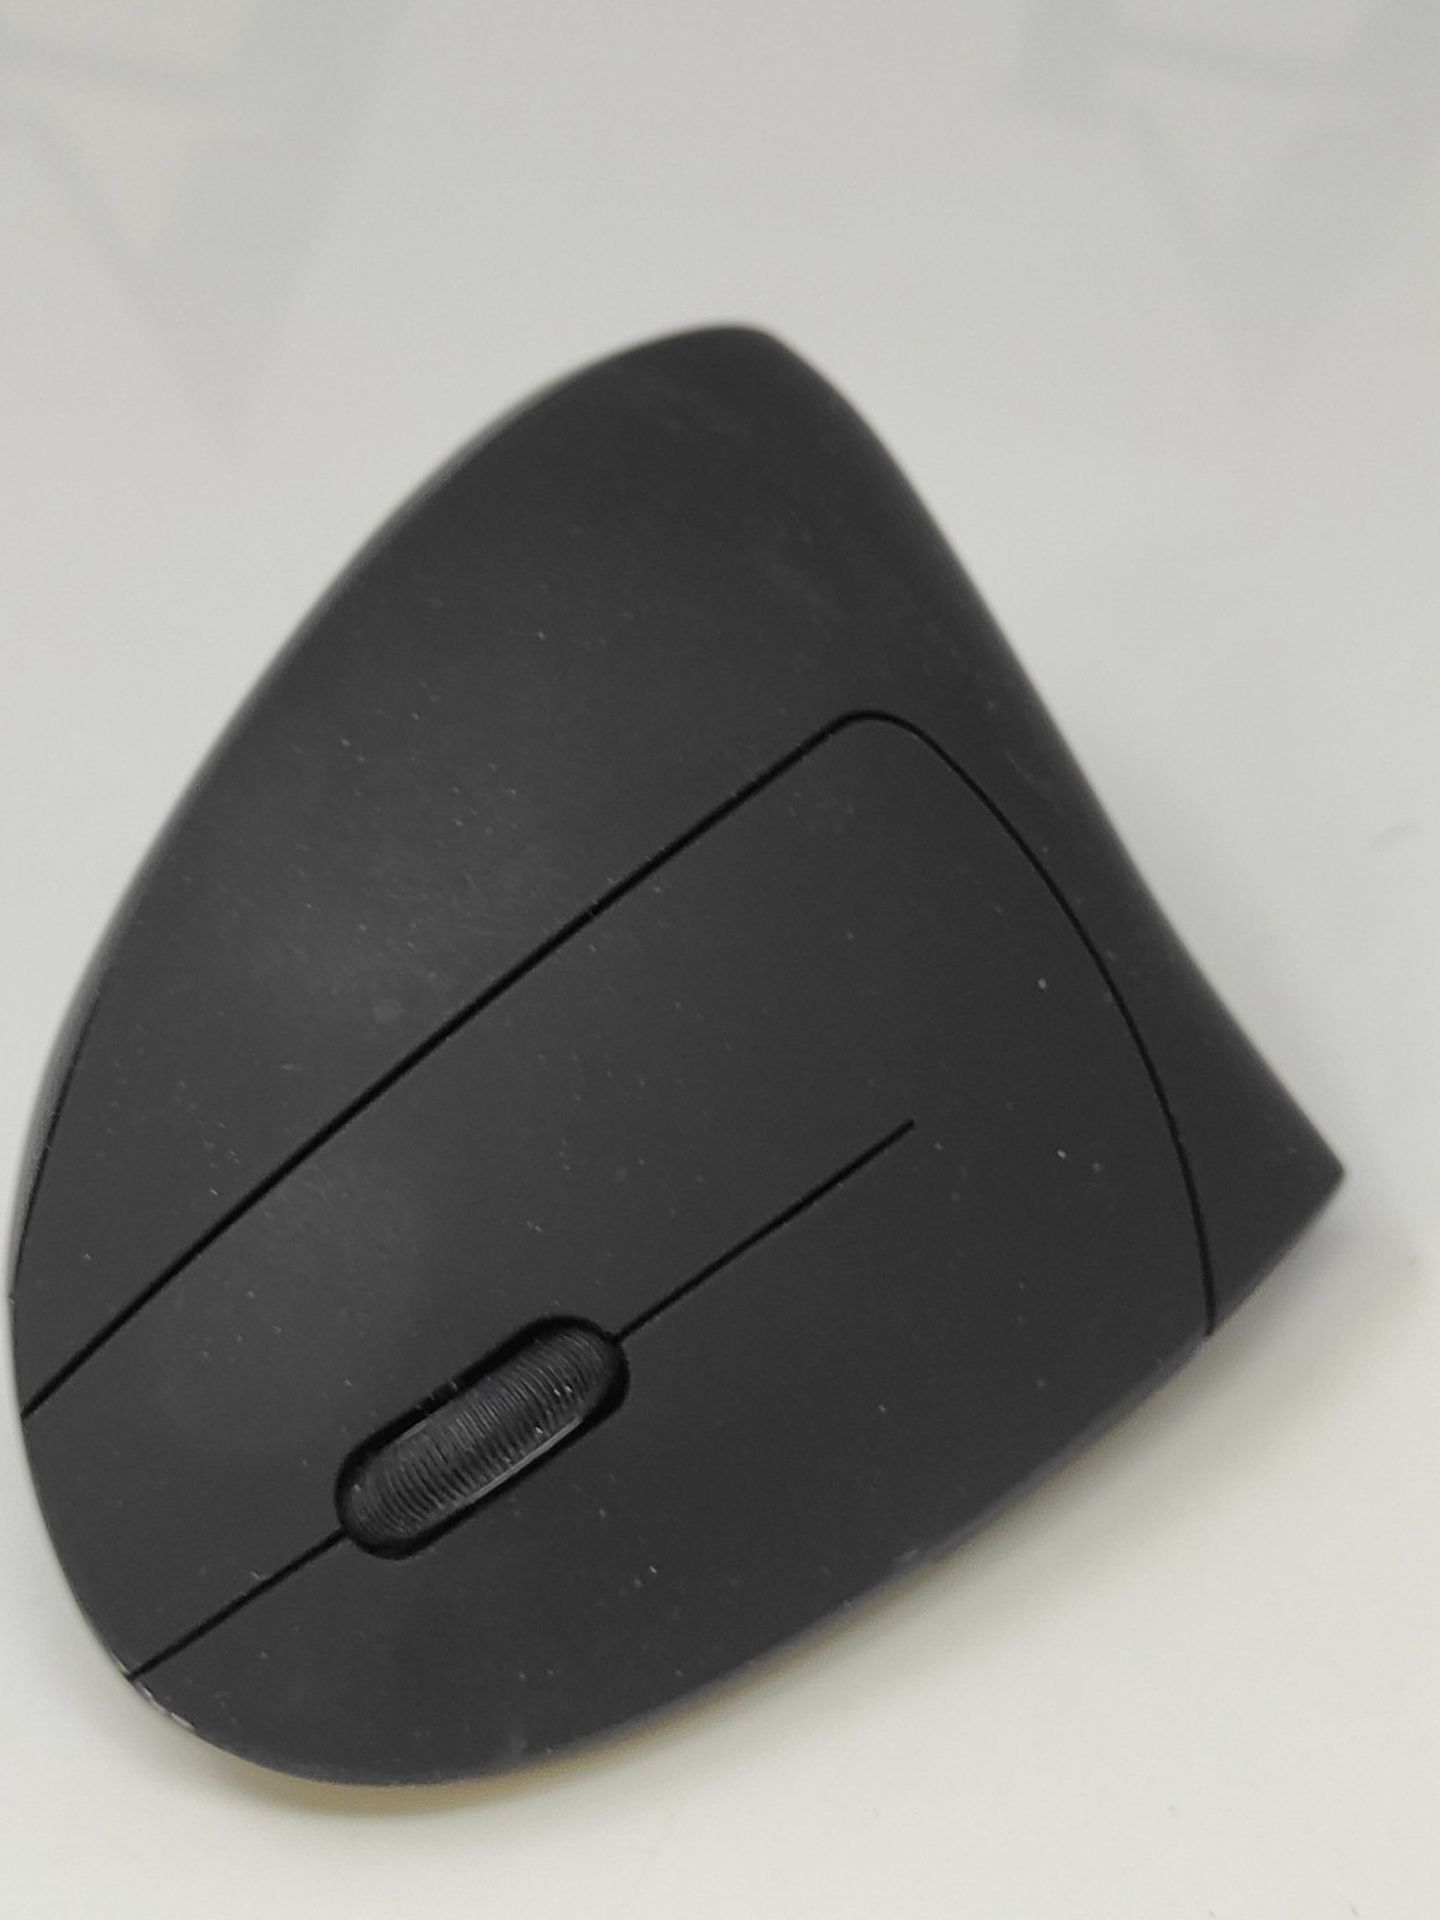 Trust Verto Wireless Vertical Mouse, Ergonomic Vertical Mouse, 800-1600 DPI, 6 Buttons - Image 3 of 3